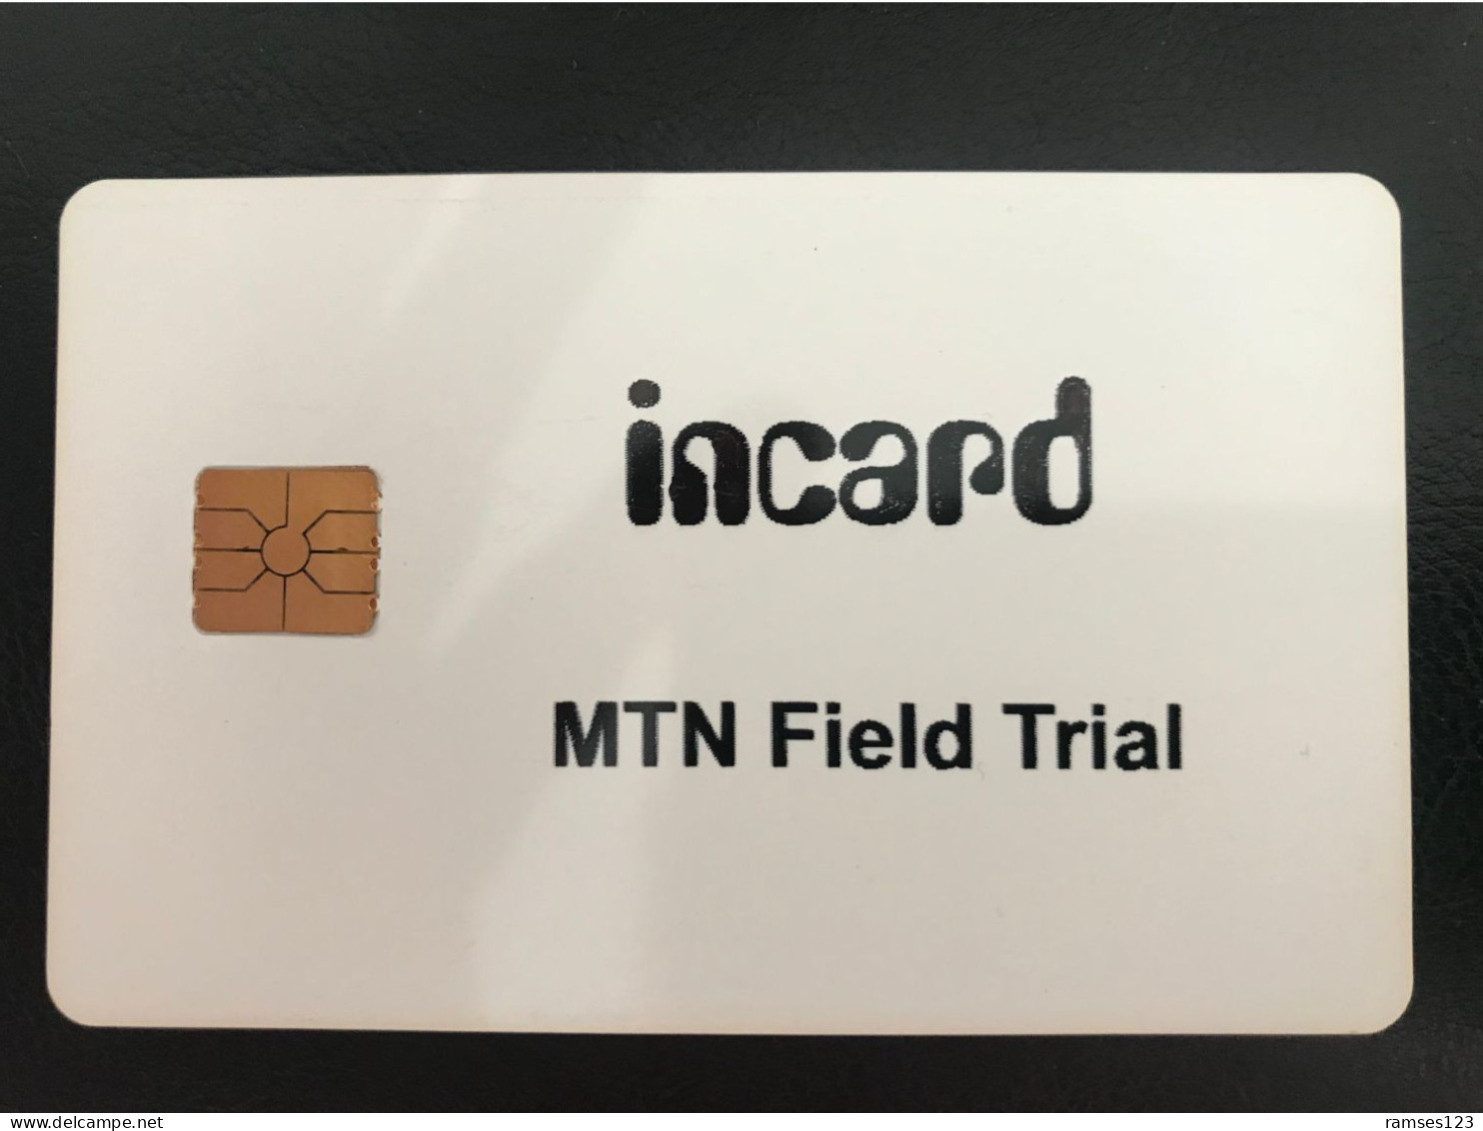 SOUTH AFRICA - Chip - INCARD - MTN Field Trial - VERY RARE - Zuid-Afrika